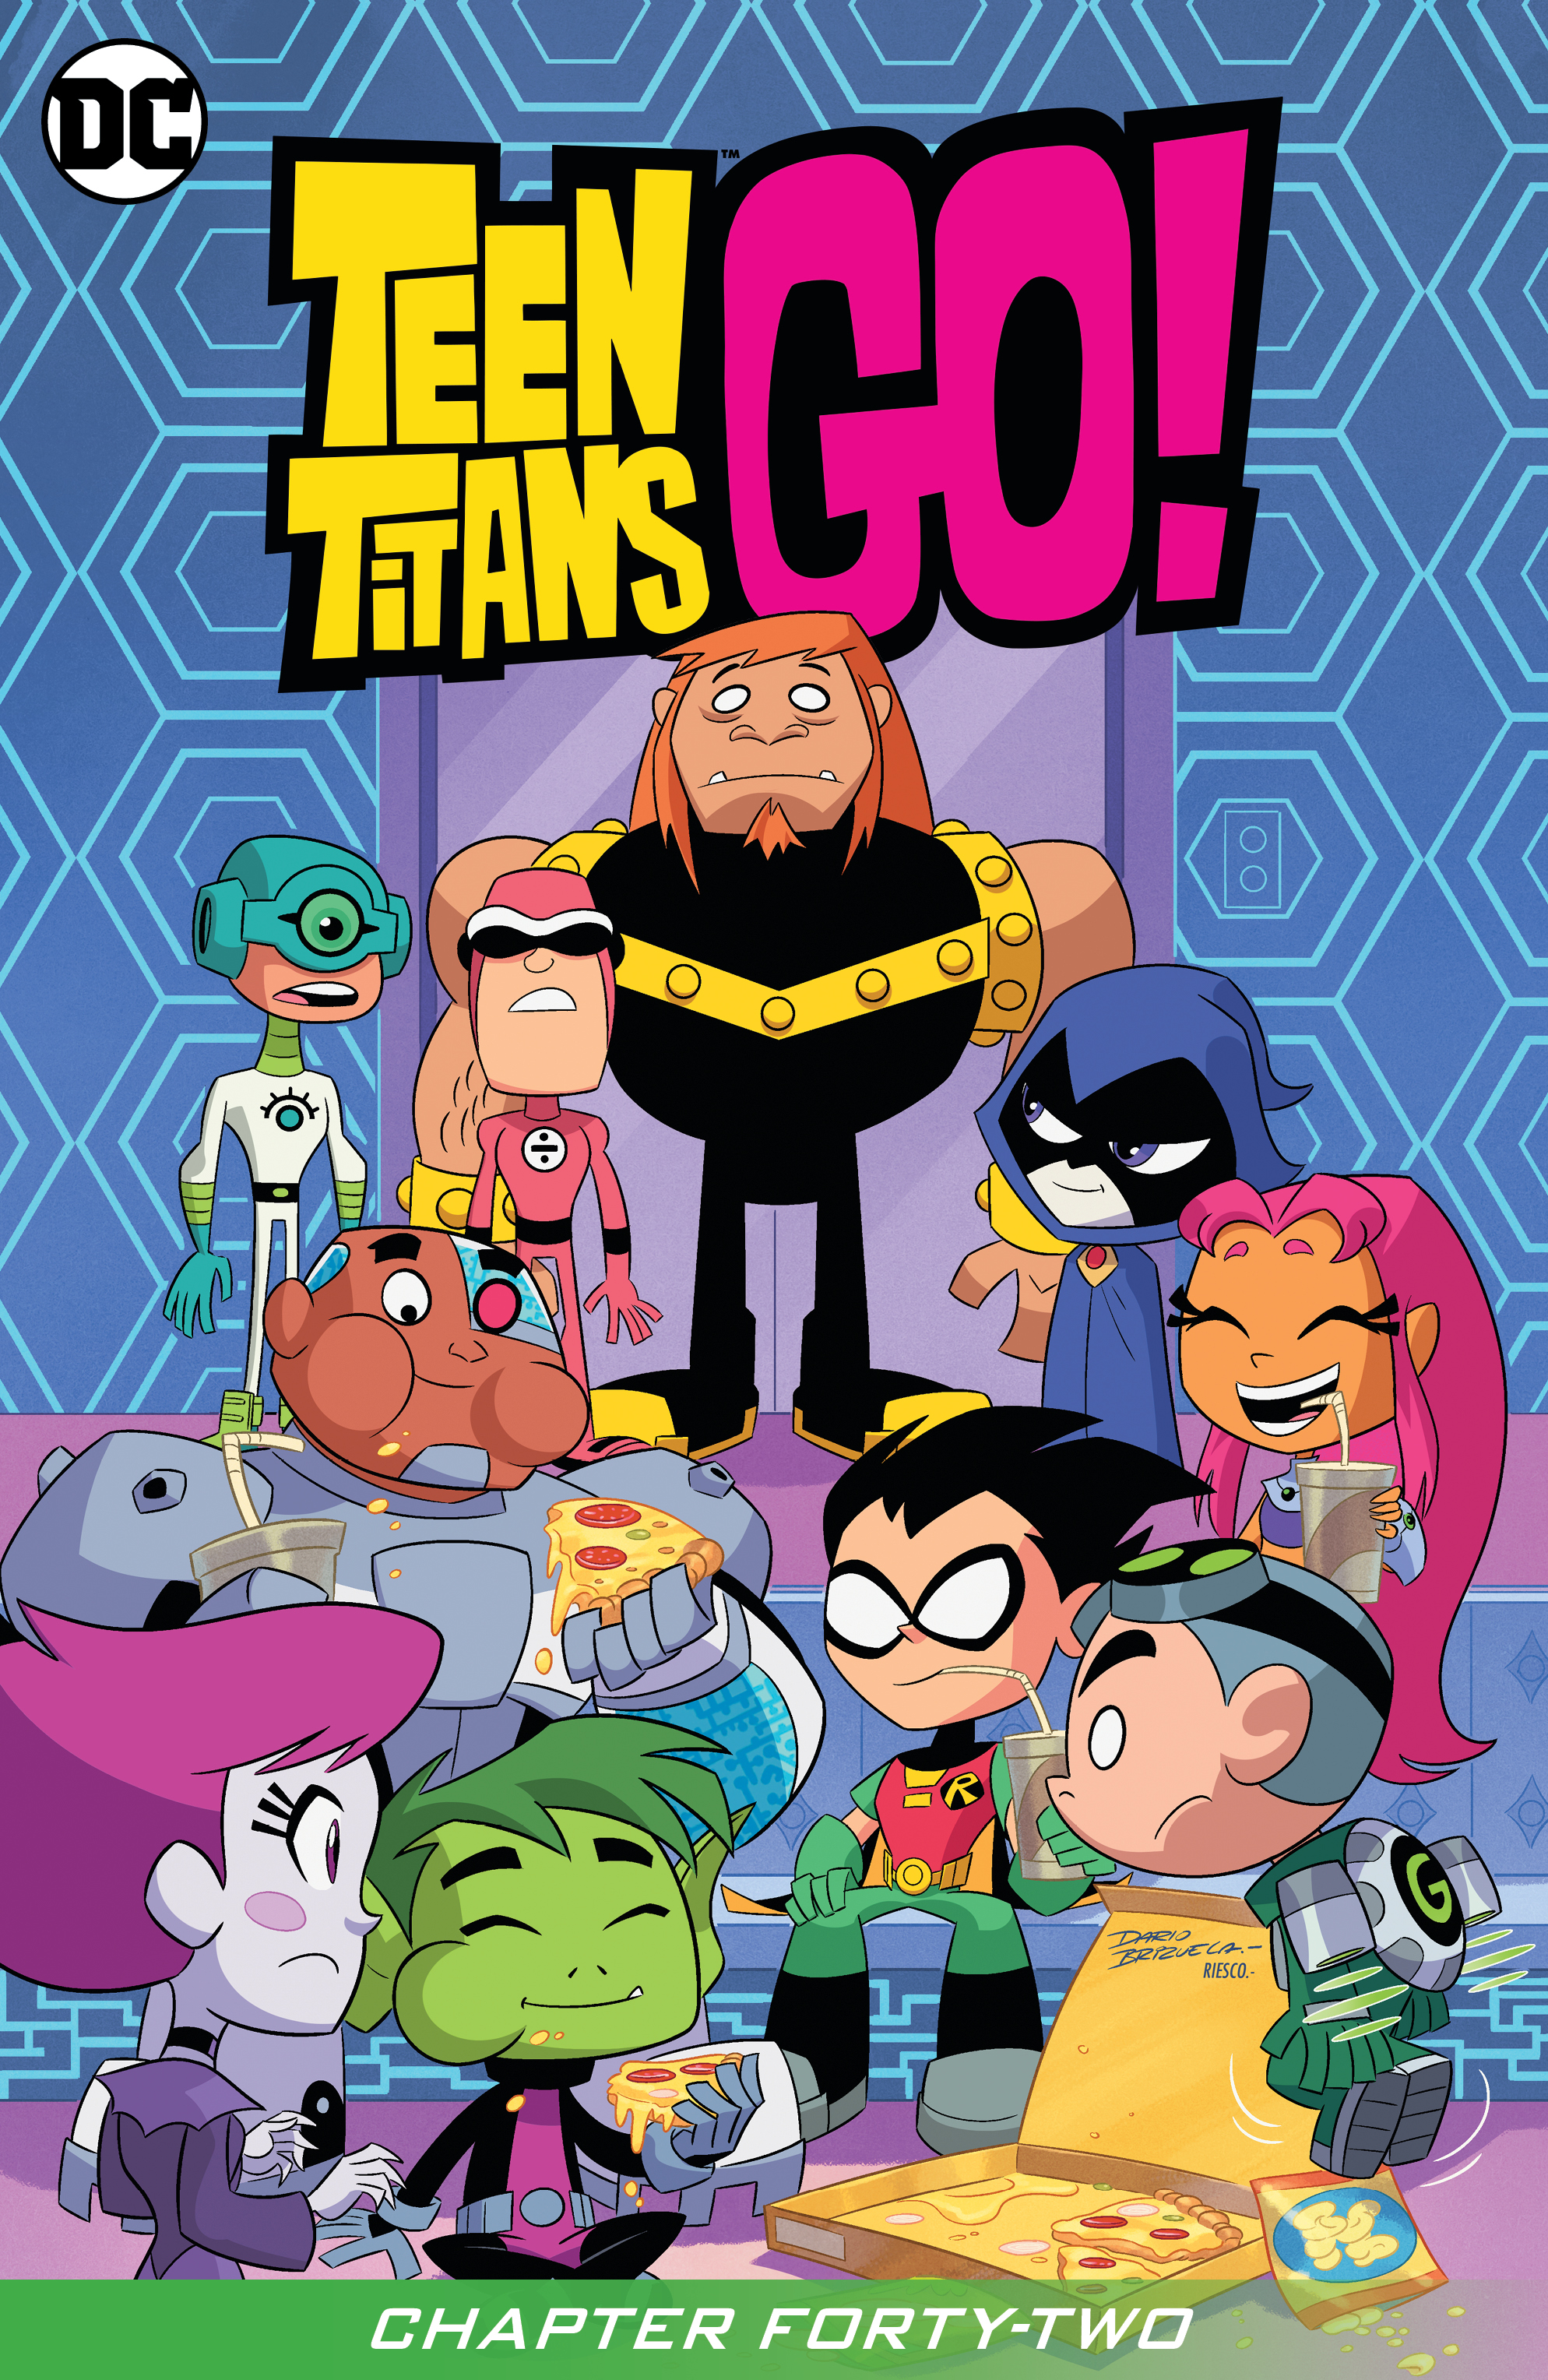 Teen Titans Go! (2013-) #42 preview images